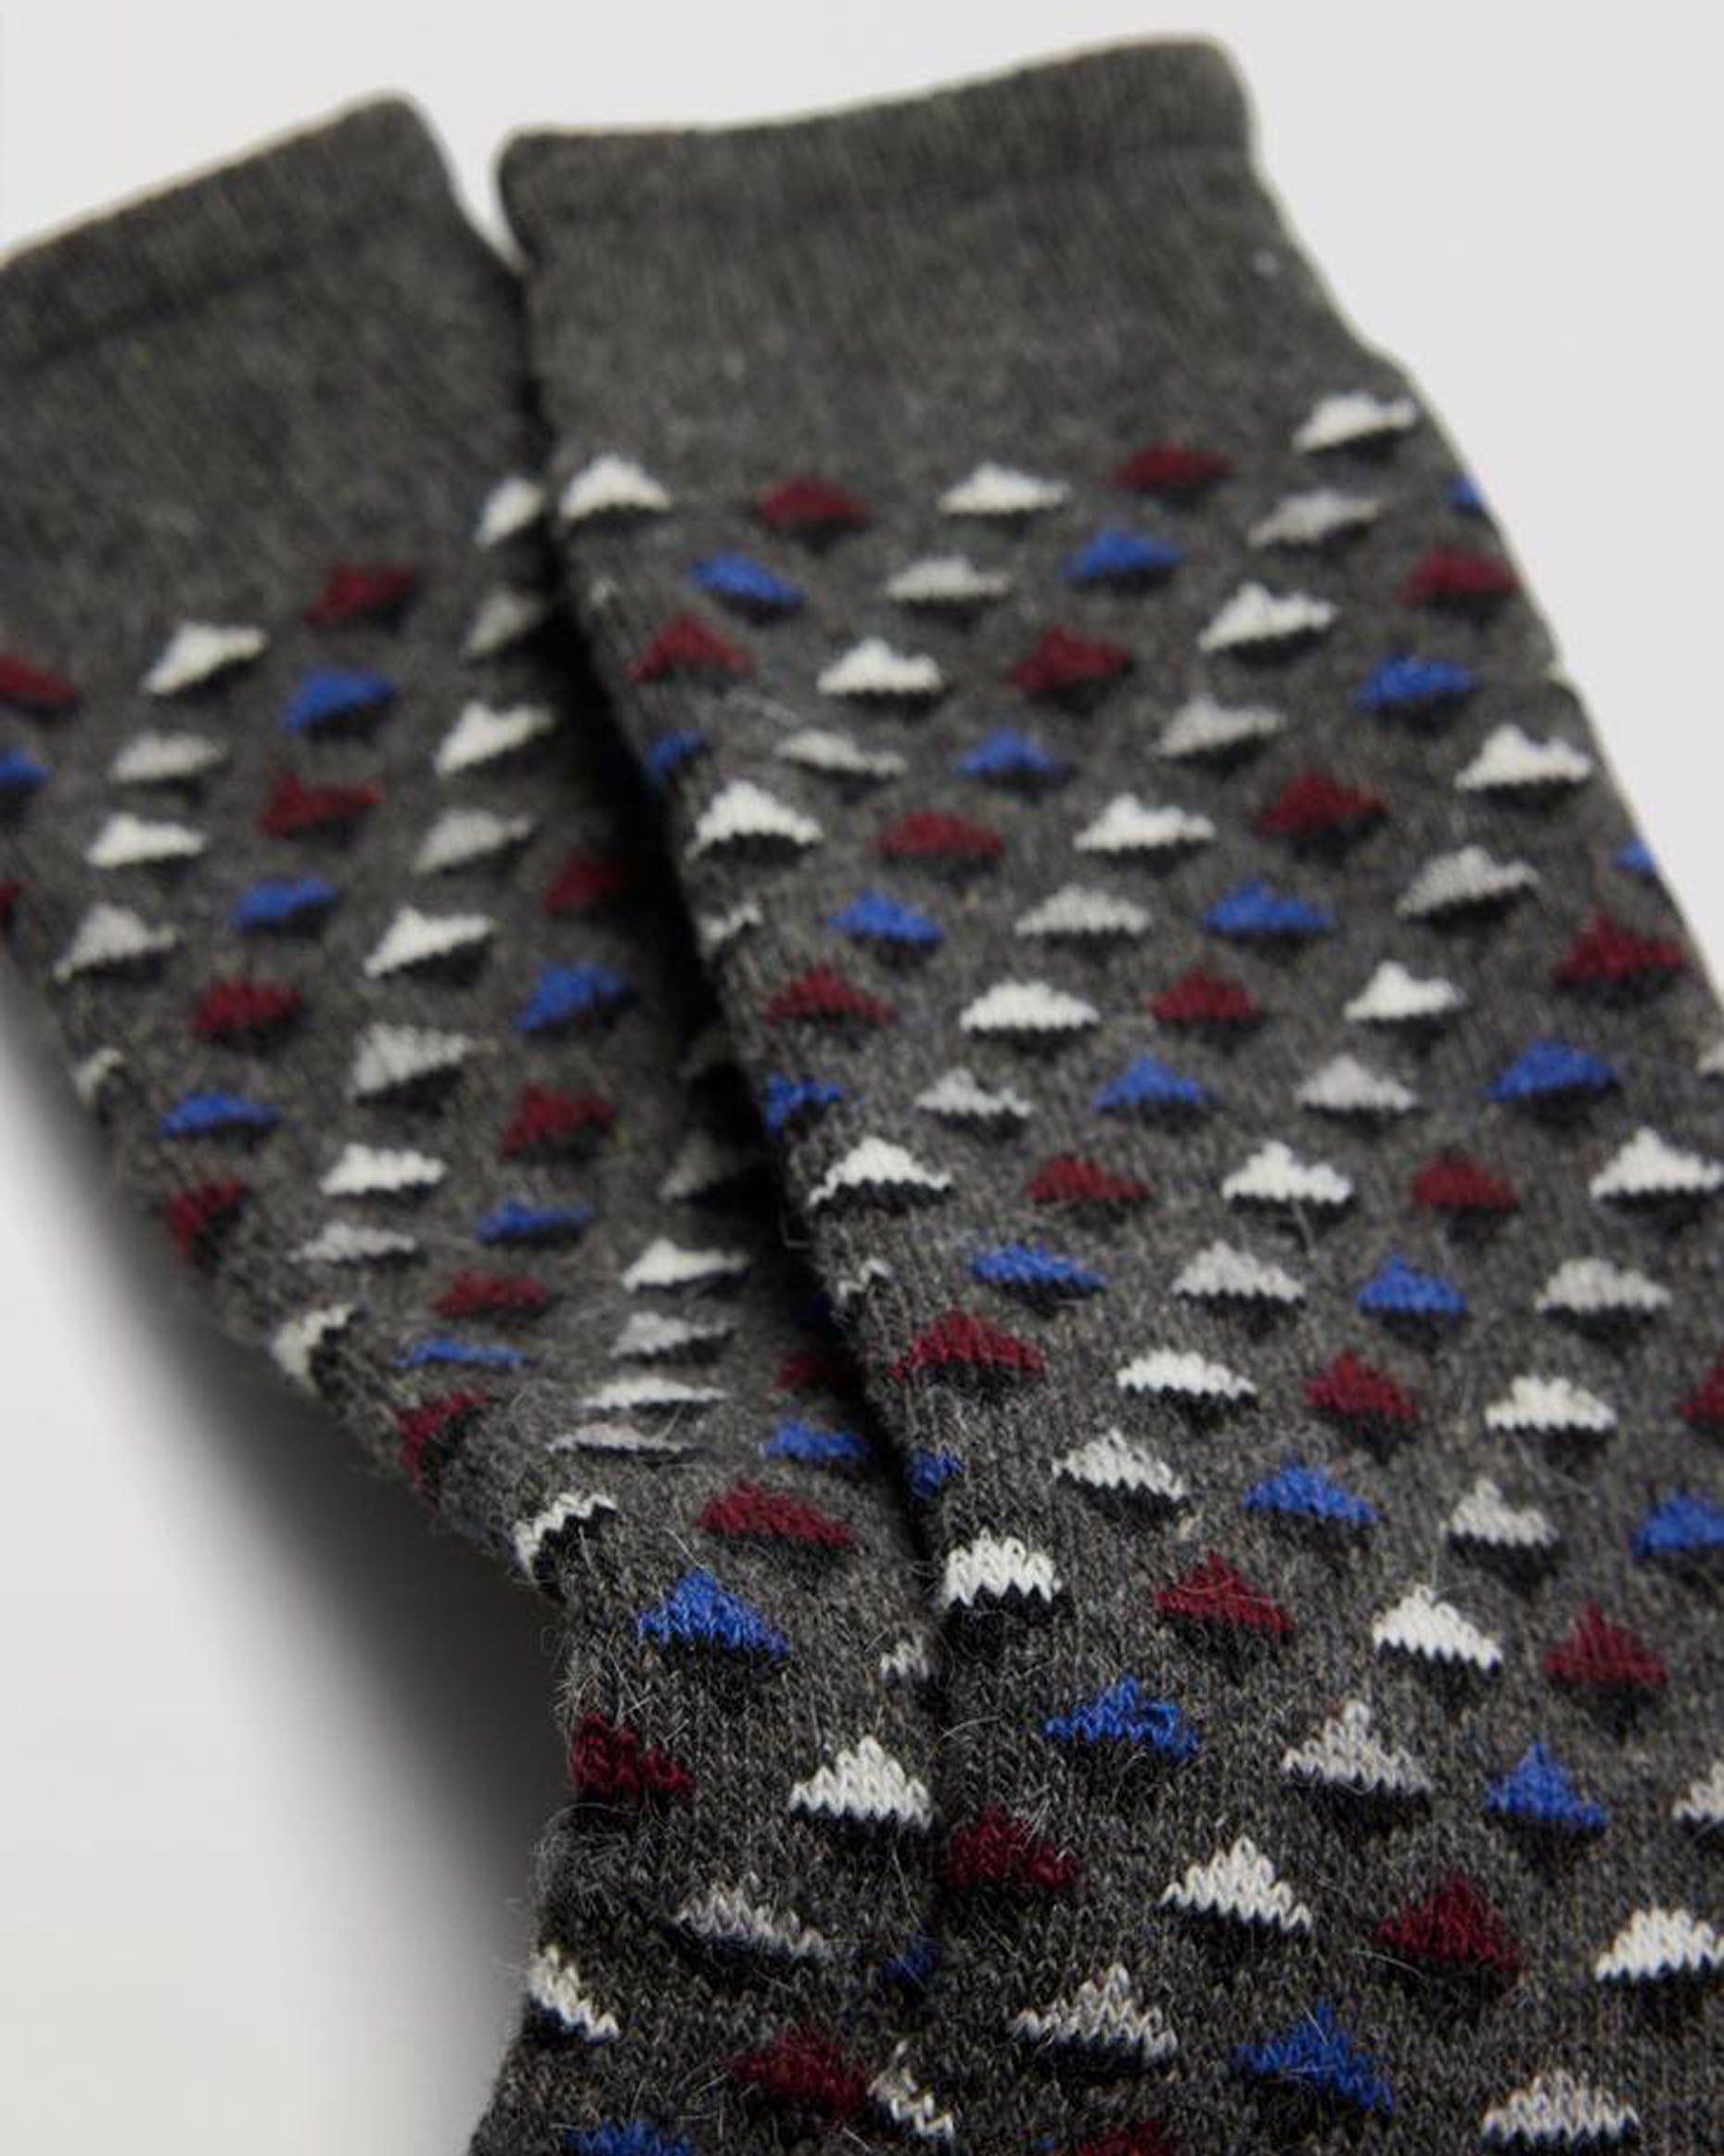 Thermal Hiking Socks - Men's dark grey chunky knitted warm and cosy angora mix socks with a diamond style pattern in blue, wine, black and off white and deep elasticated comfort cuff.